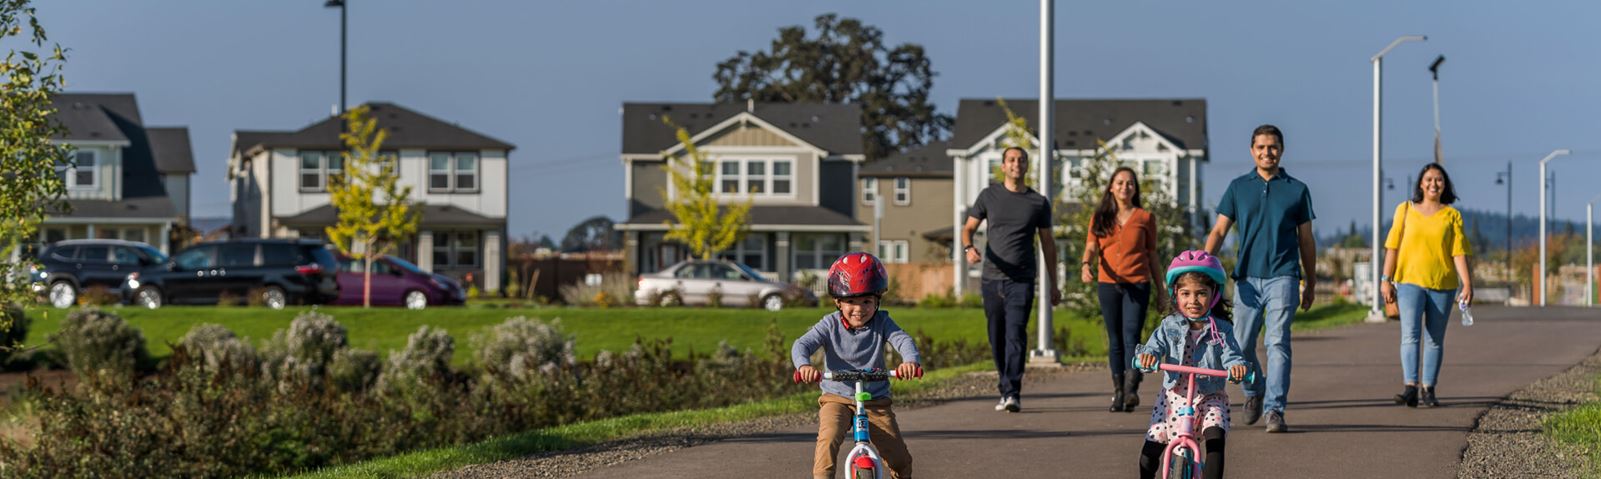 Children riding bikes on a path with family Reeds Crossing Community Hillsboro OR